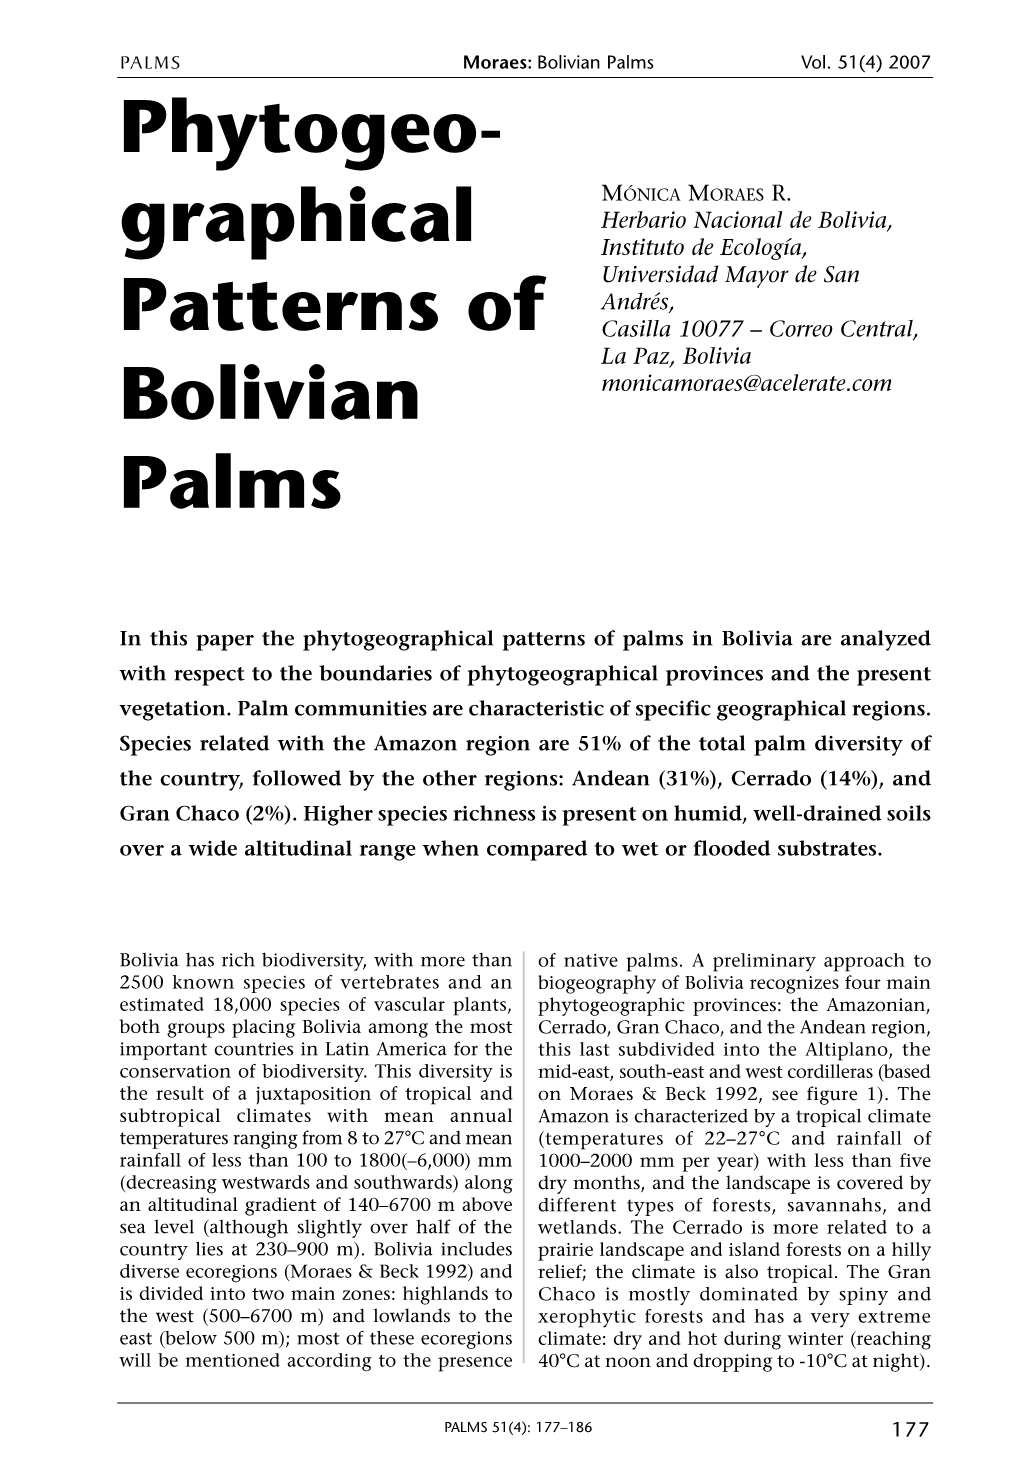 Phytogeo- Graphical Patterns of Bolivian Palms